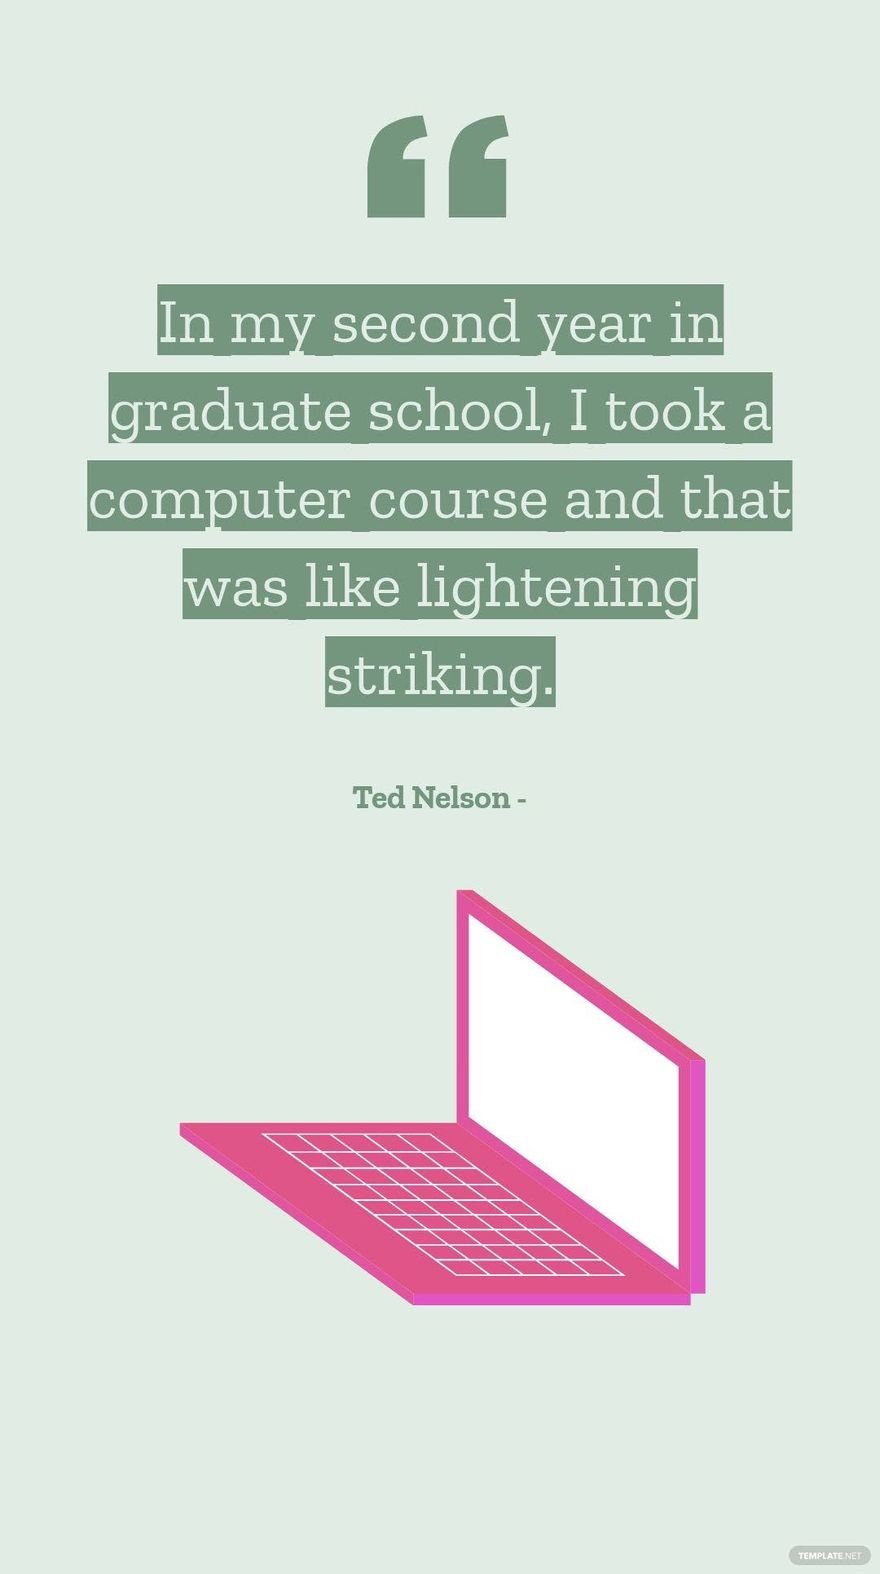 Free Ted Nelson - In my second year in graduate school, I took a computer course and that was like lightening striking.